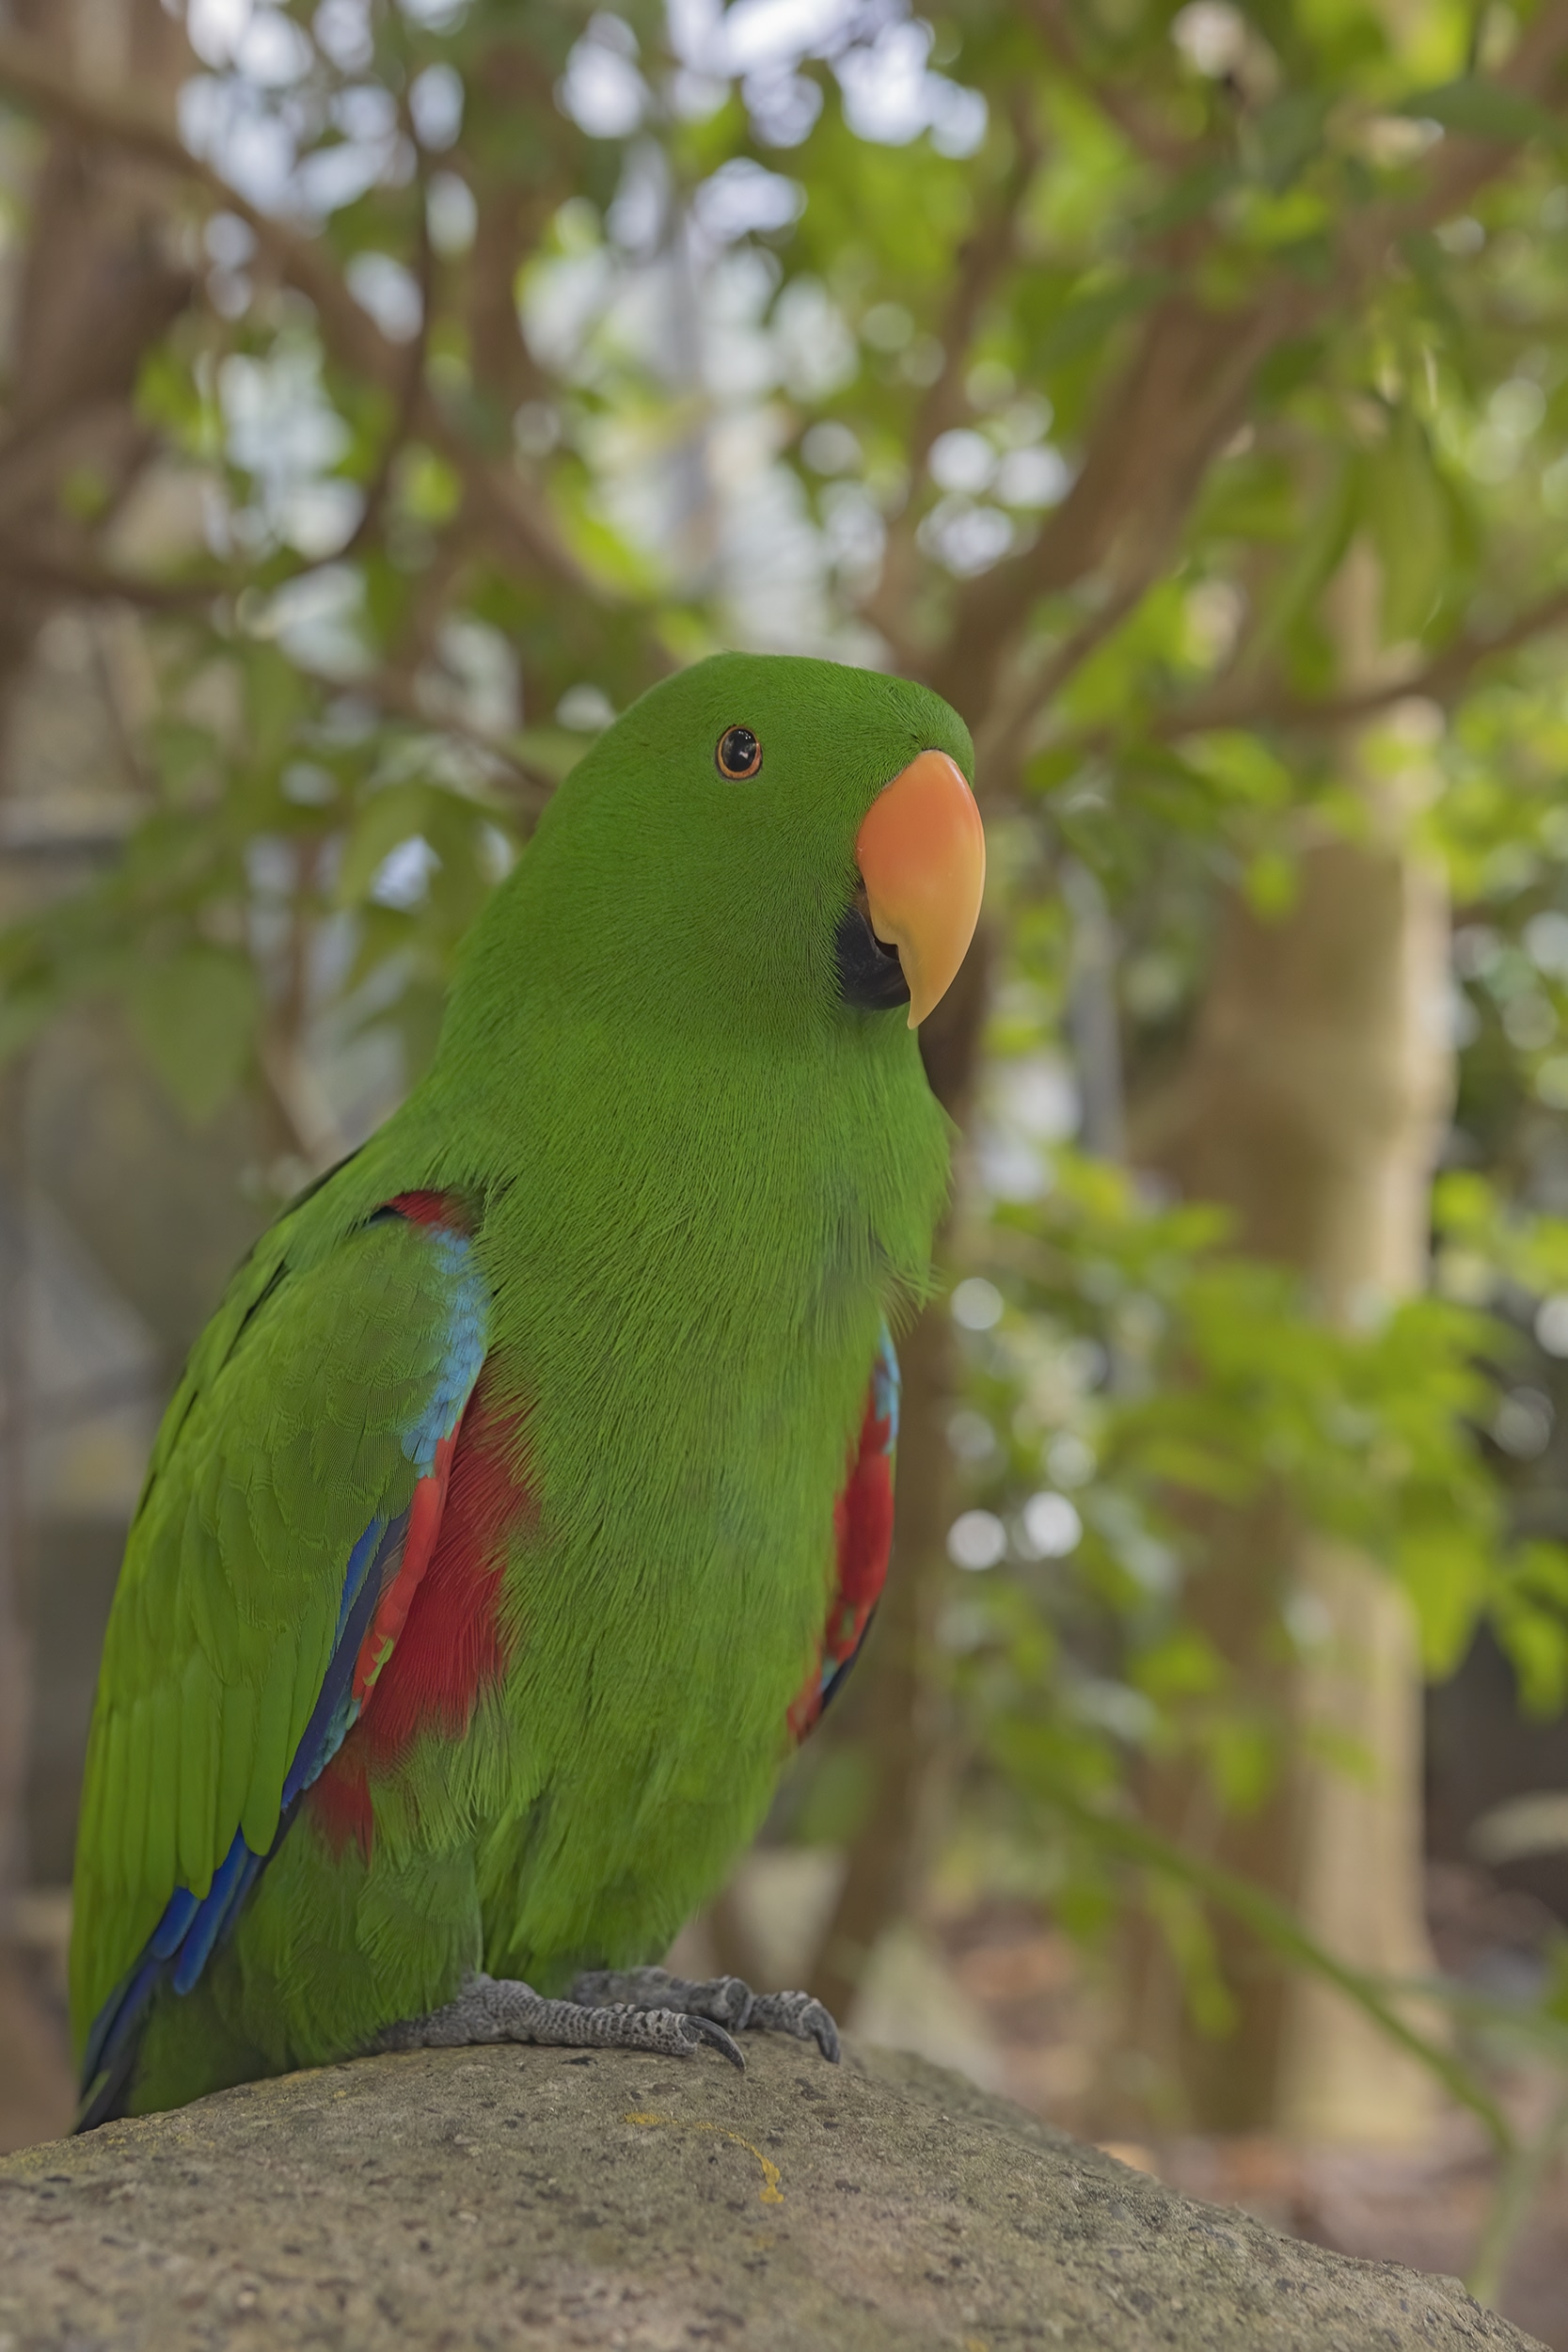 "Little E", Eclectus Parrot at the Victoria Butterfly Gardens